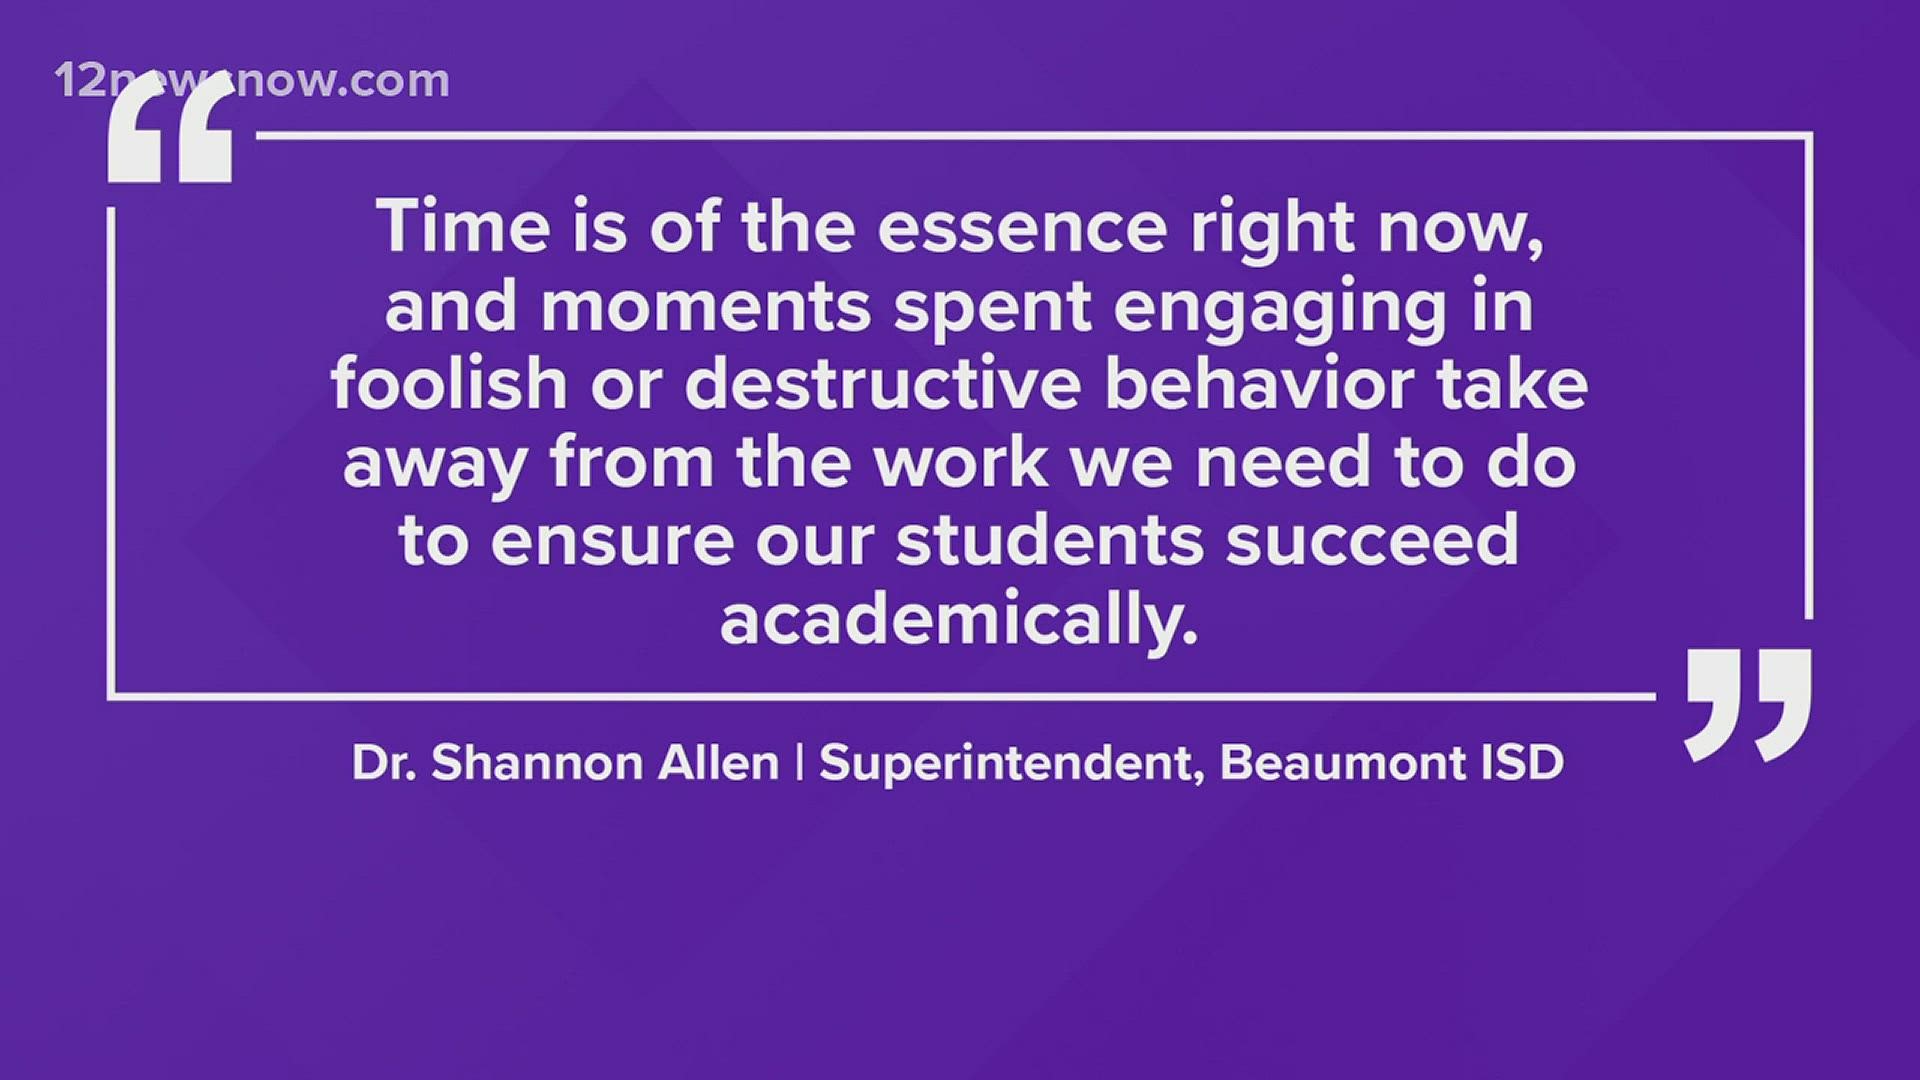 Beaumont ISD released a statement calling on families to help with the recent surge in threats and student misconduct.